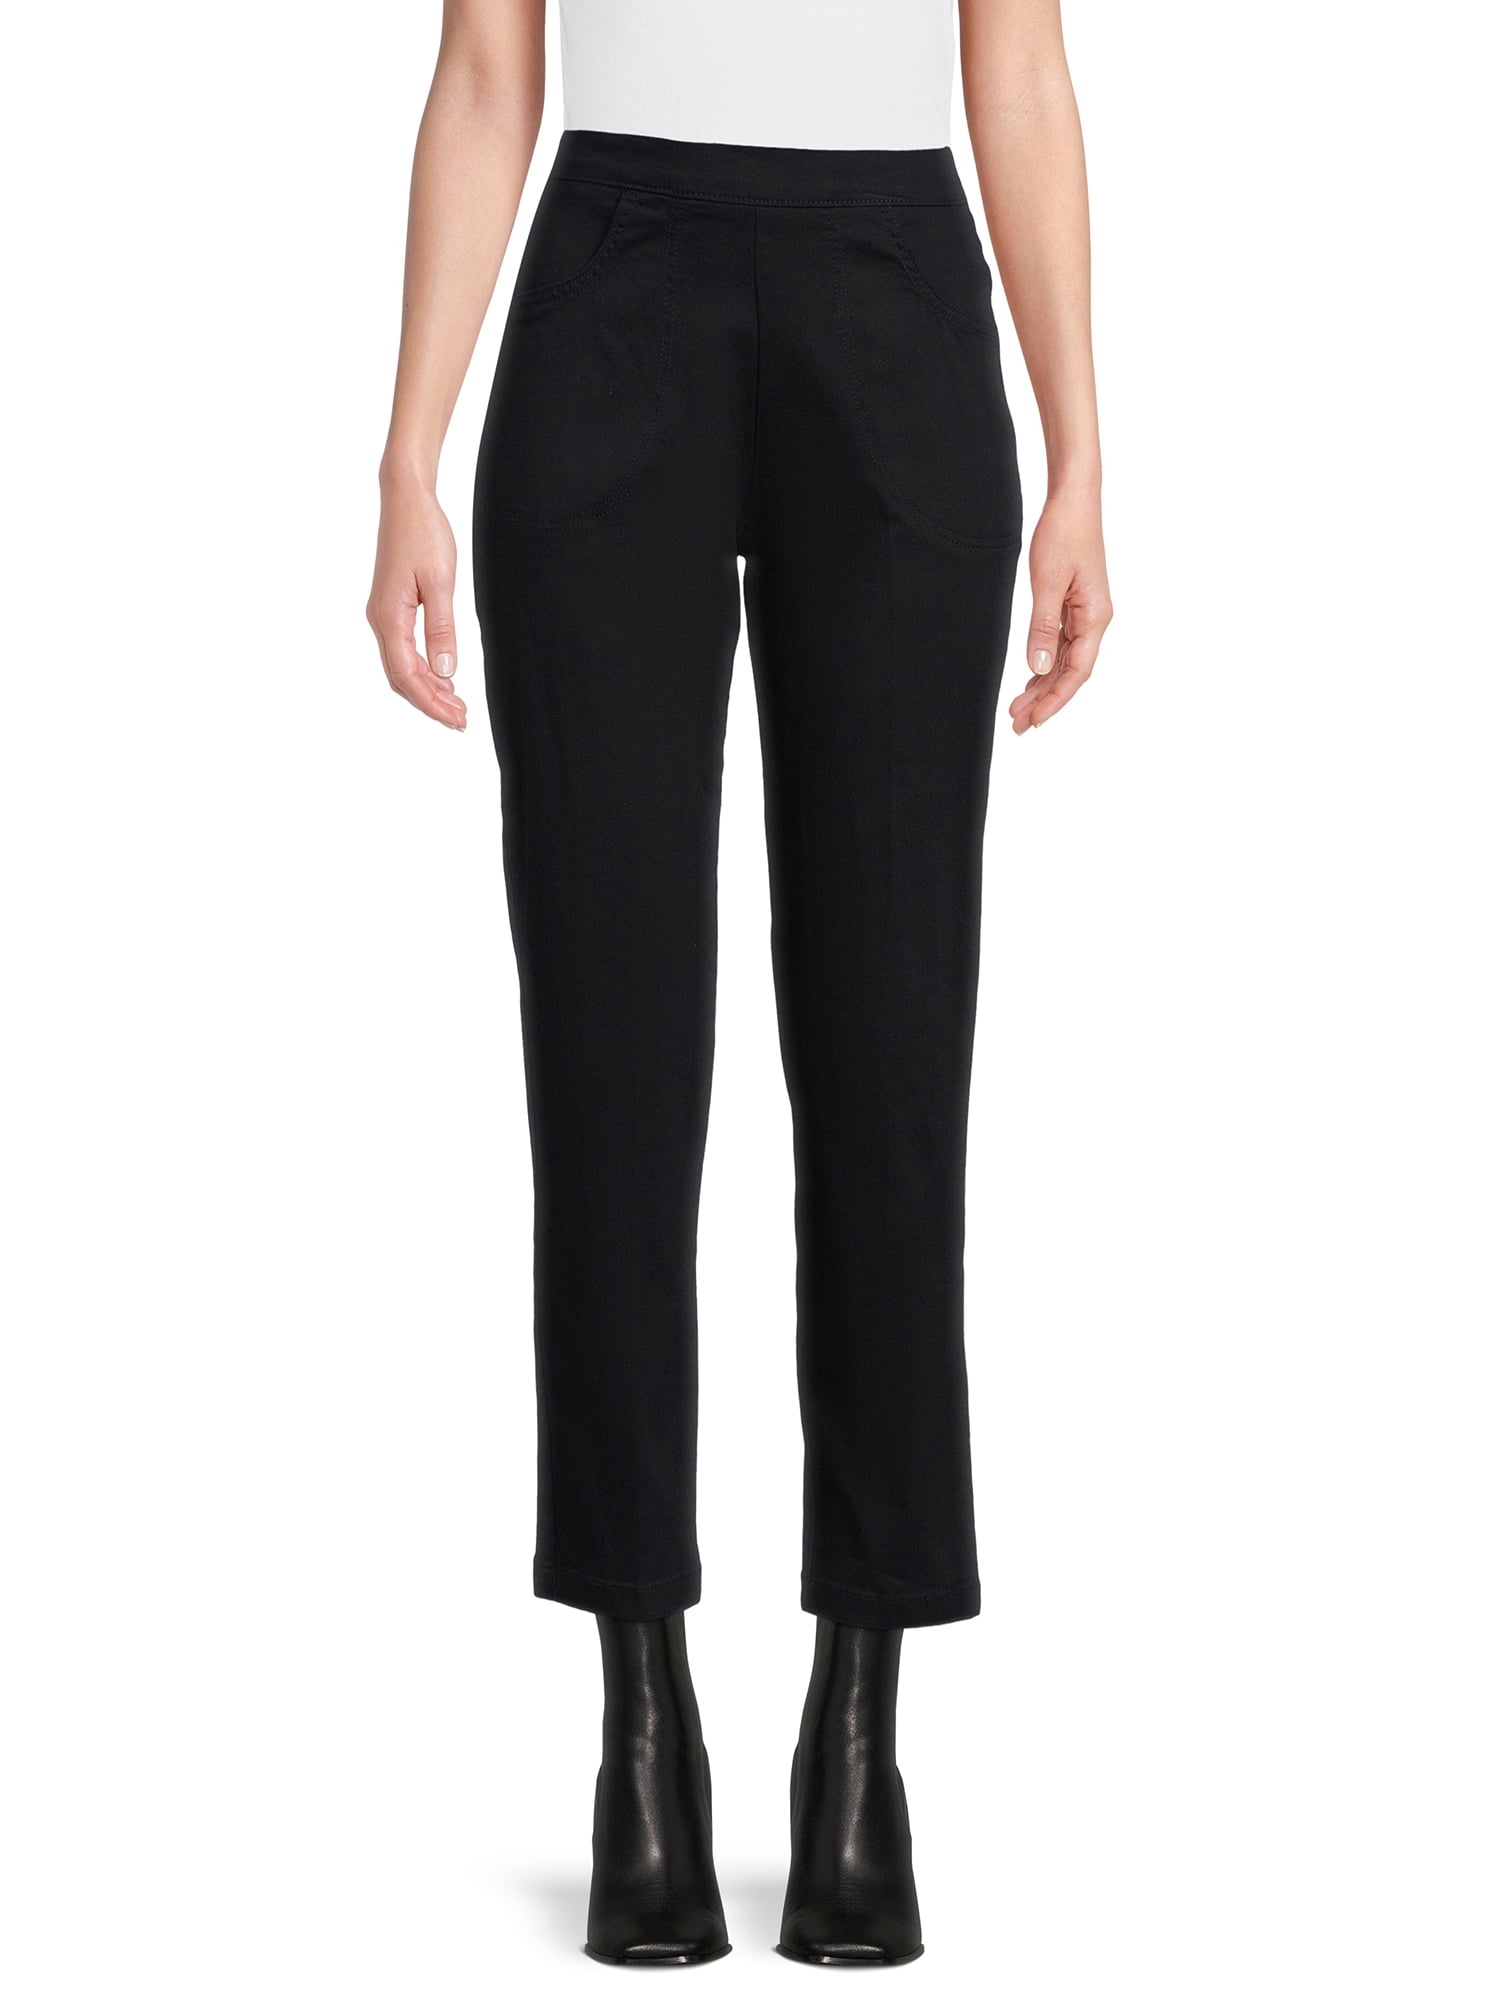 RealSize Women's Stretch Pull On Pants with Pockets - Walmart.com